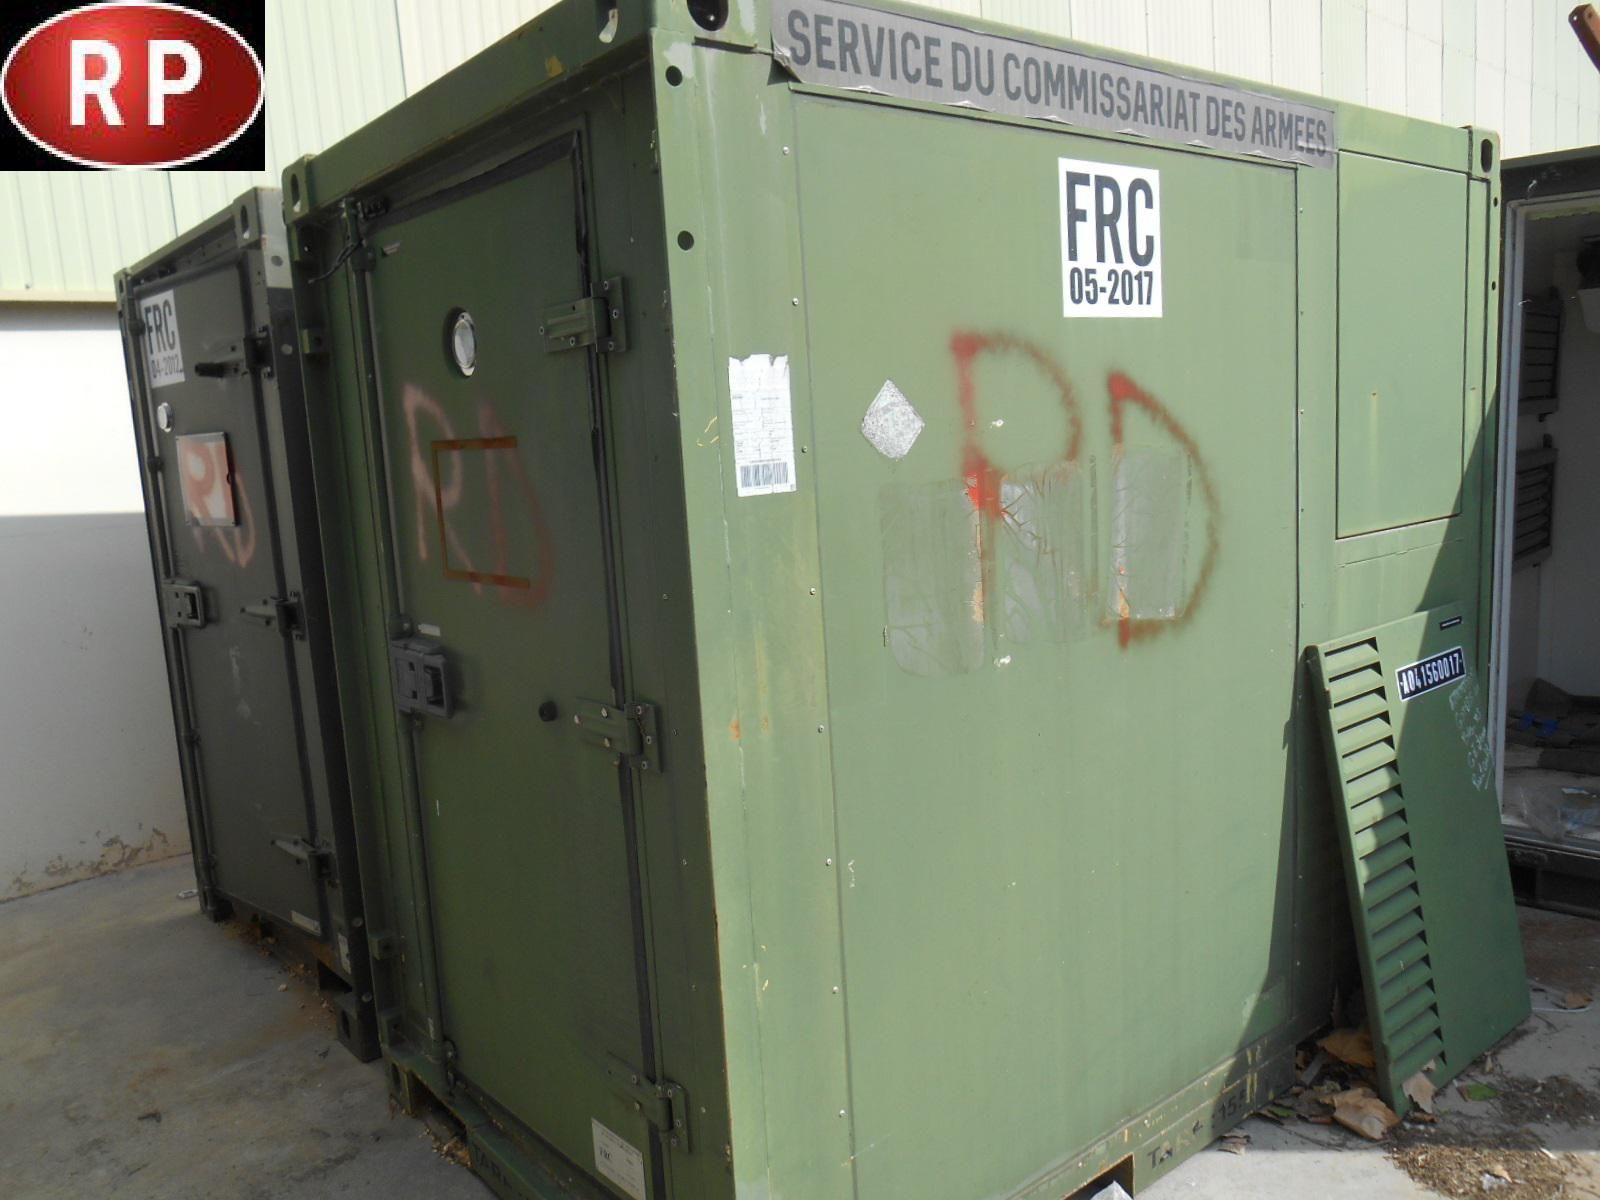 Null RP] 2 refrigerated containers 1.5m3, working condition unknown:
- ACMH, reg&hellip;